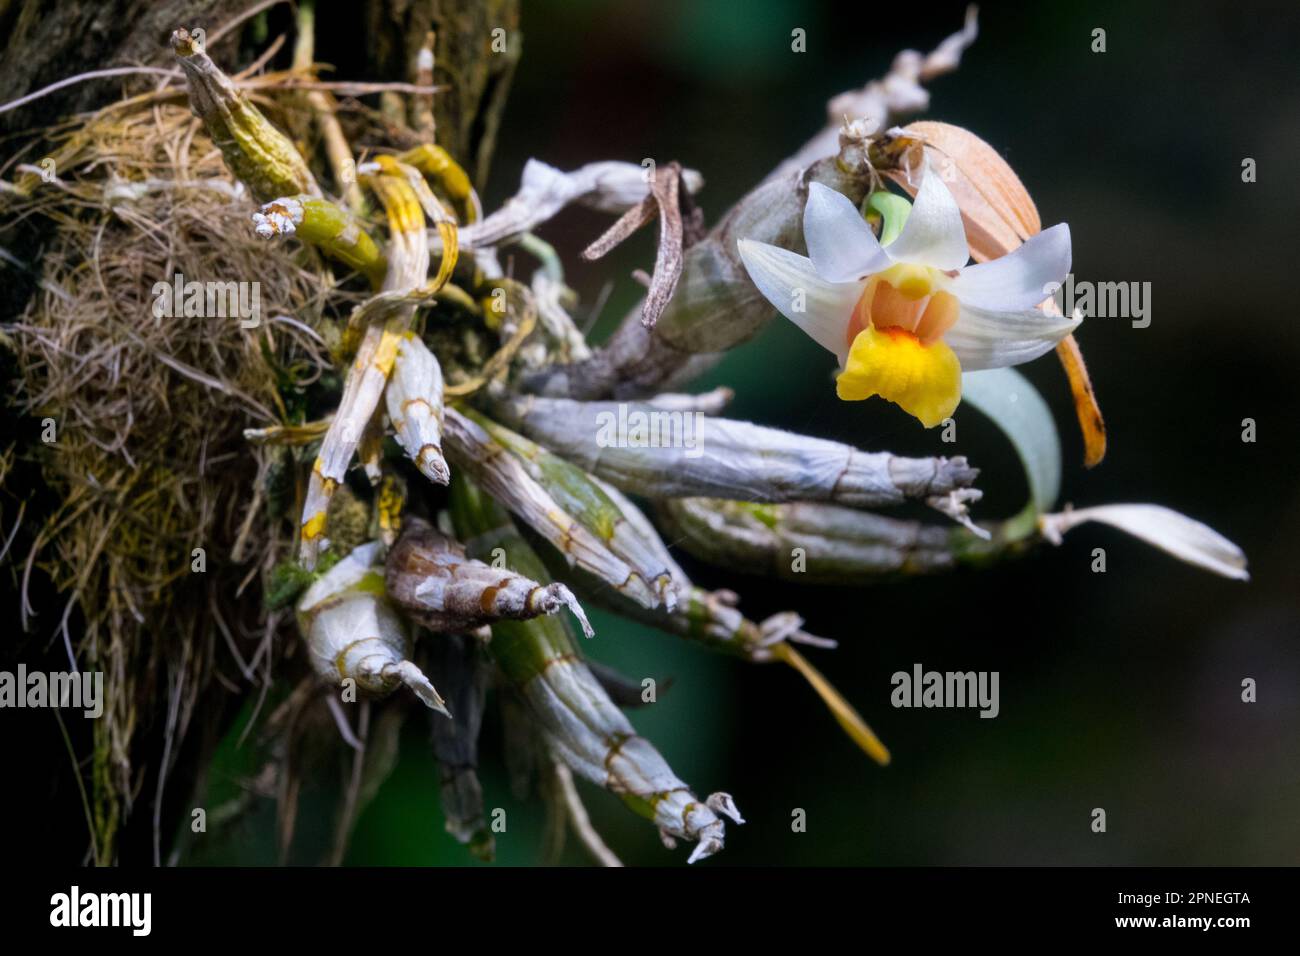 Flower, Orchid, Dendrobium bellatulum flowering plant with roots Stock Photo